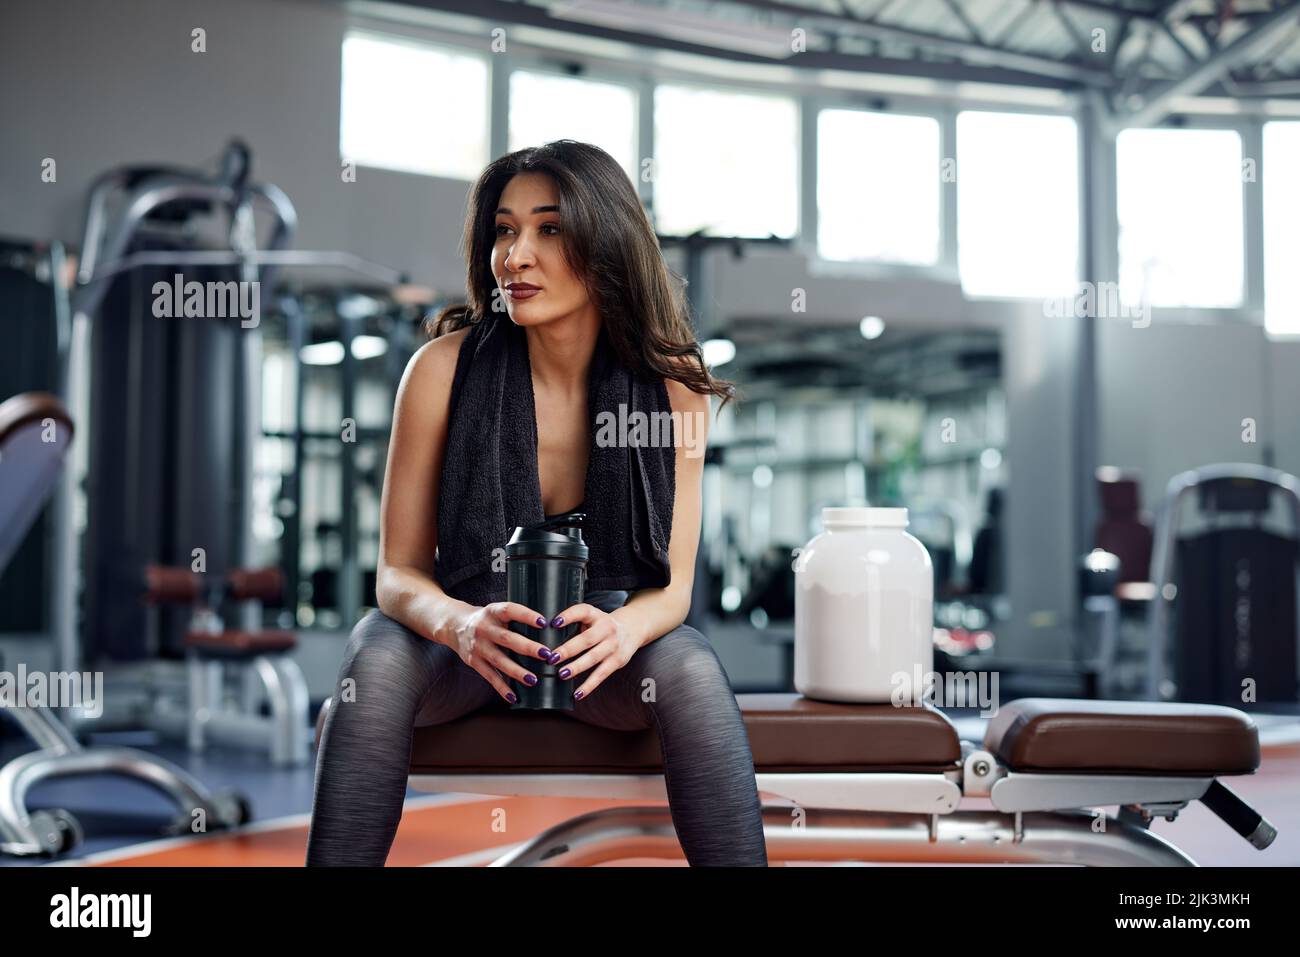 Young active woman taking a break in the gym and drinking protein shake. Stock Photo